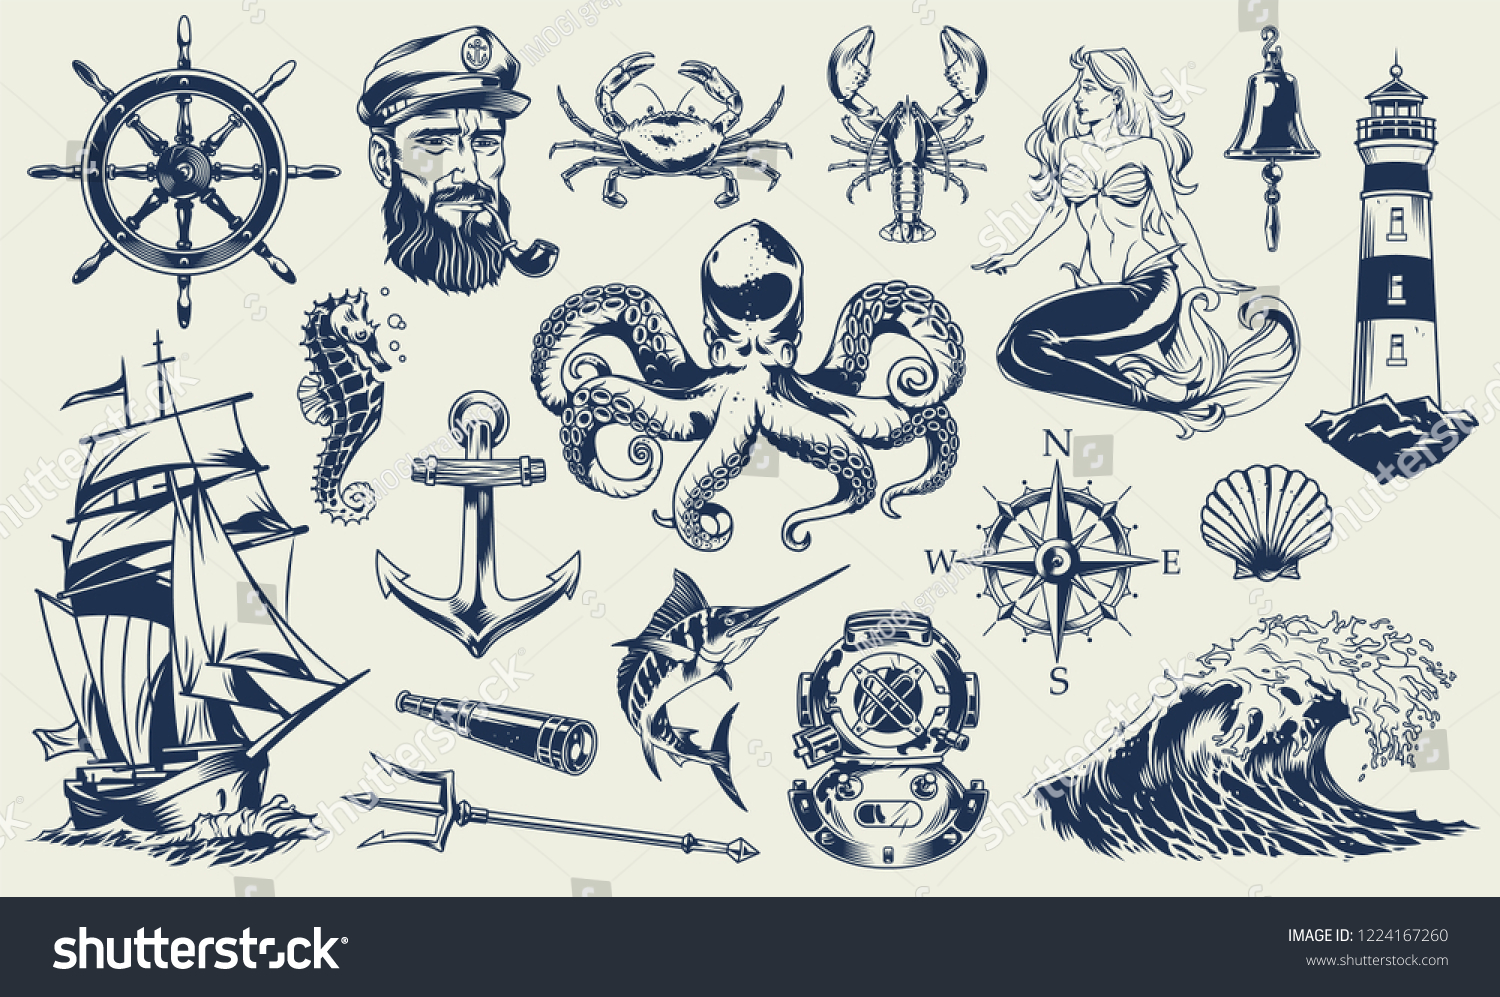 SVG of Vintage monochrome nautical elements set with sailor sea animals lighthouse mermaid ship diving helmet anchor compass poseidon trident isolated vector illustration svg